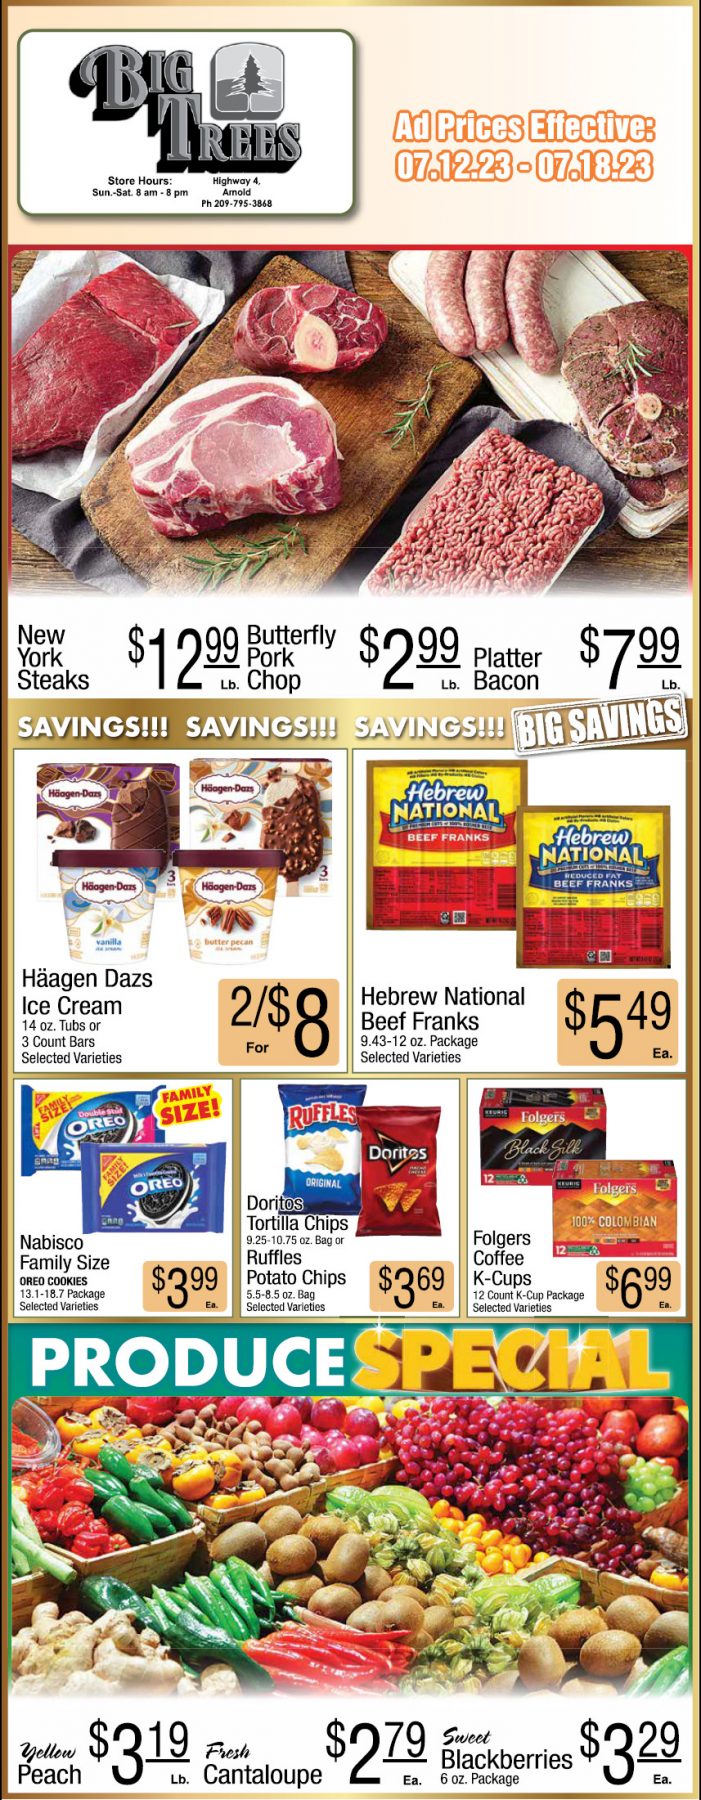 Big Trees Market Weekly Ad, Grocery, Produce, Meat & Deli Specials July 12 ~ 18!  Shop Local & Save!